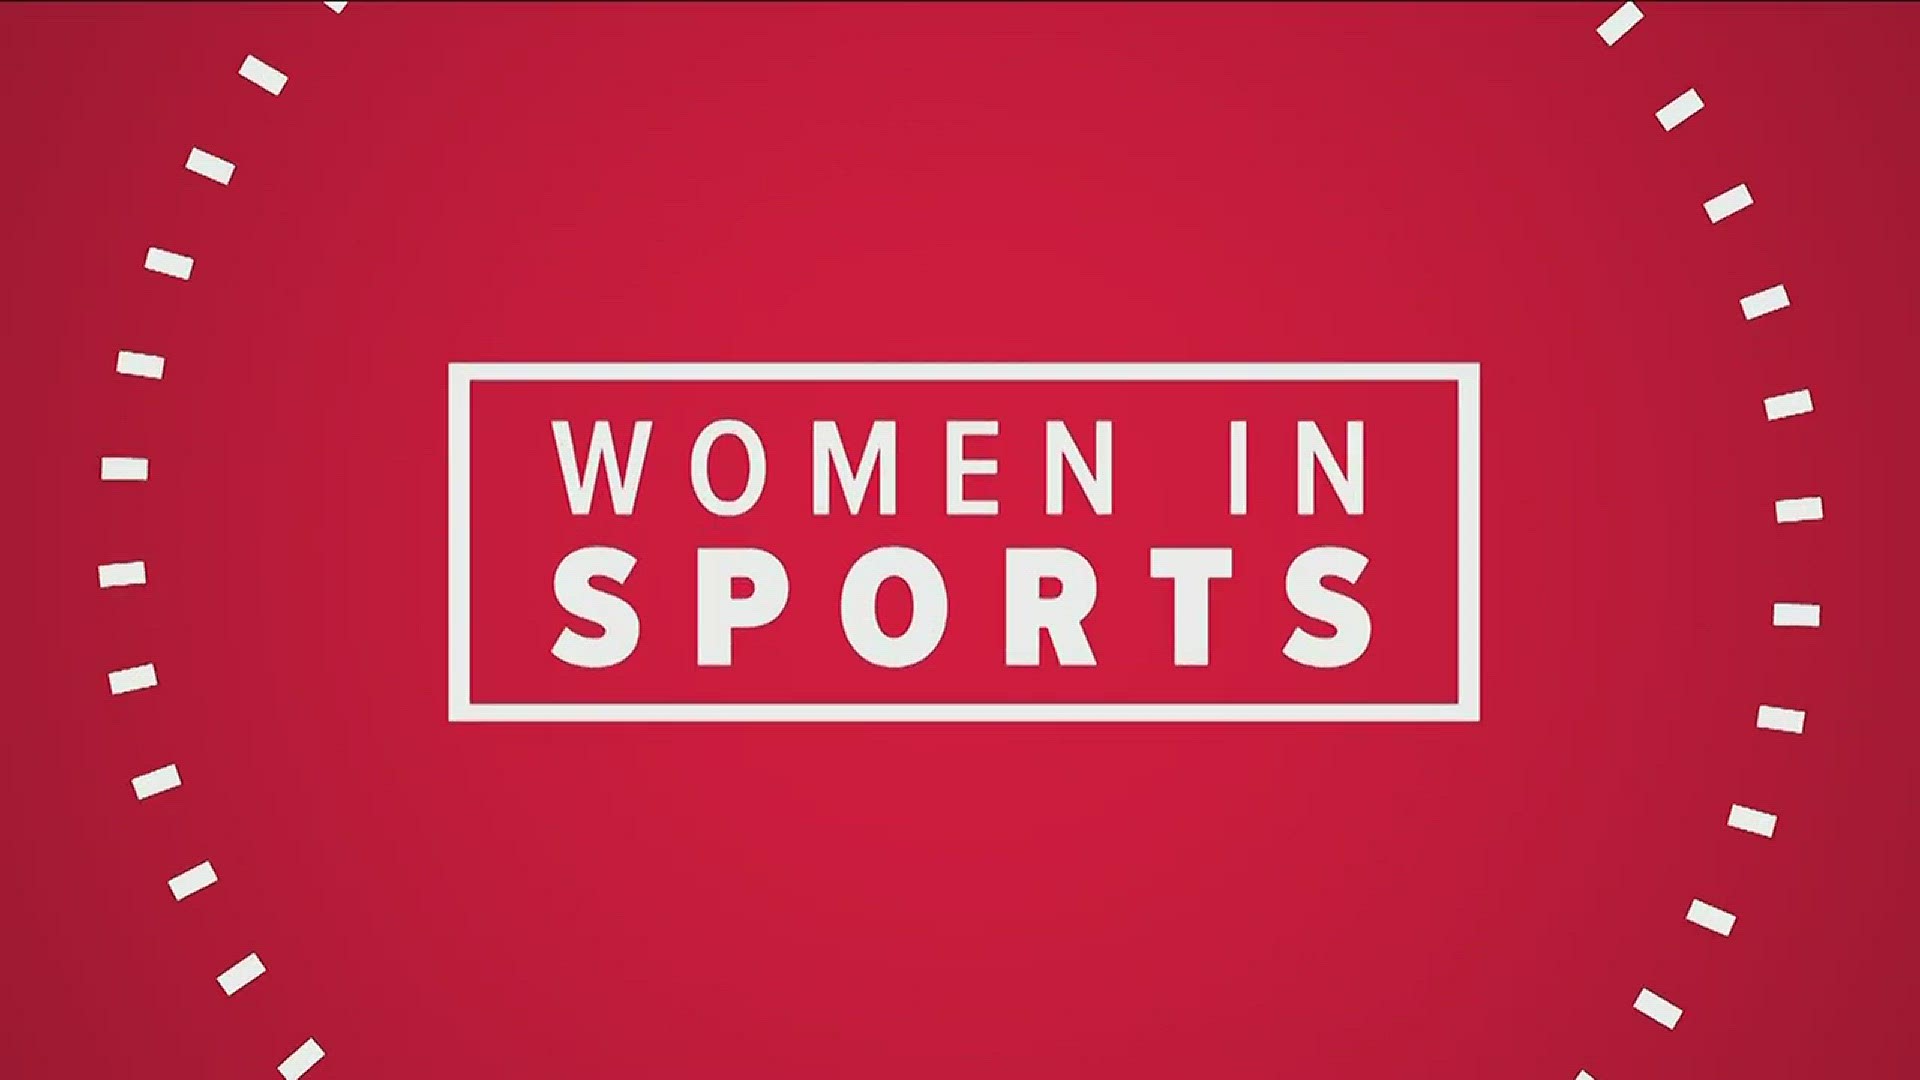 In honor of Women's History Month, 11Alive spoke to women around the metro dominating in the sports world.